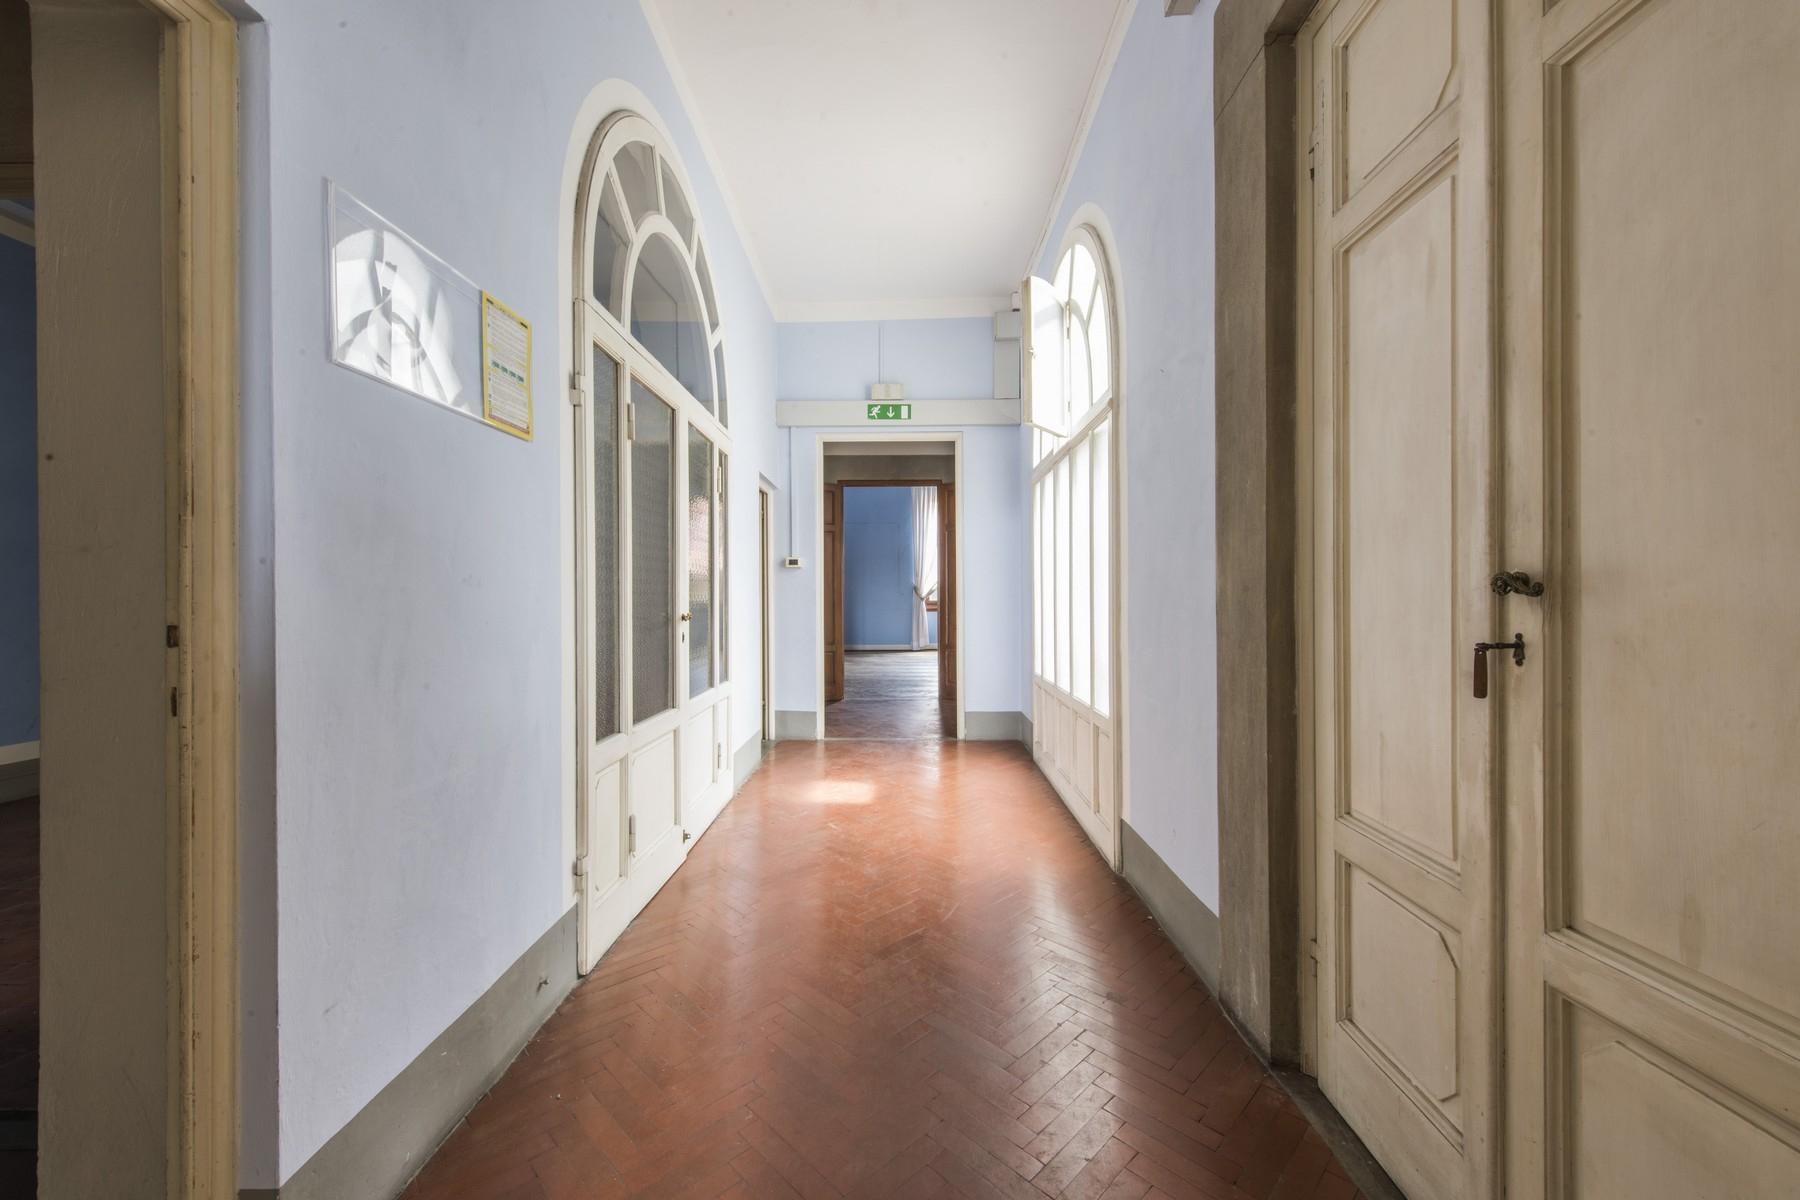 Magnificent 520sqm penthouse in a historic Florentine palazzo. - 20